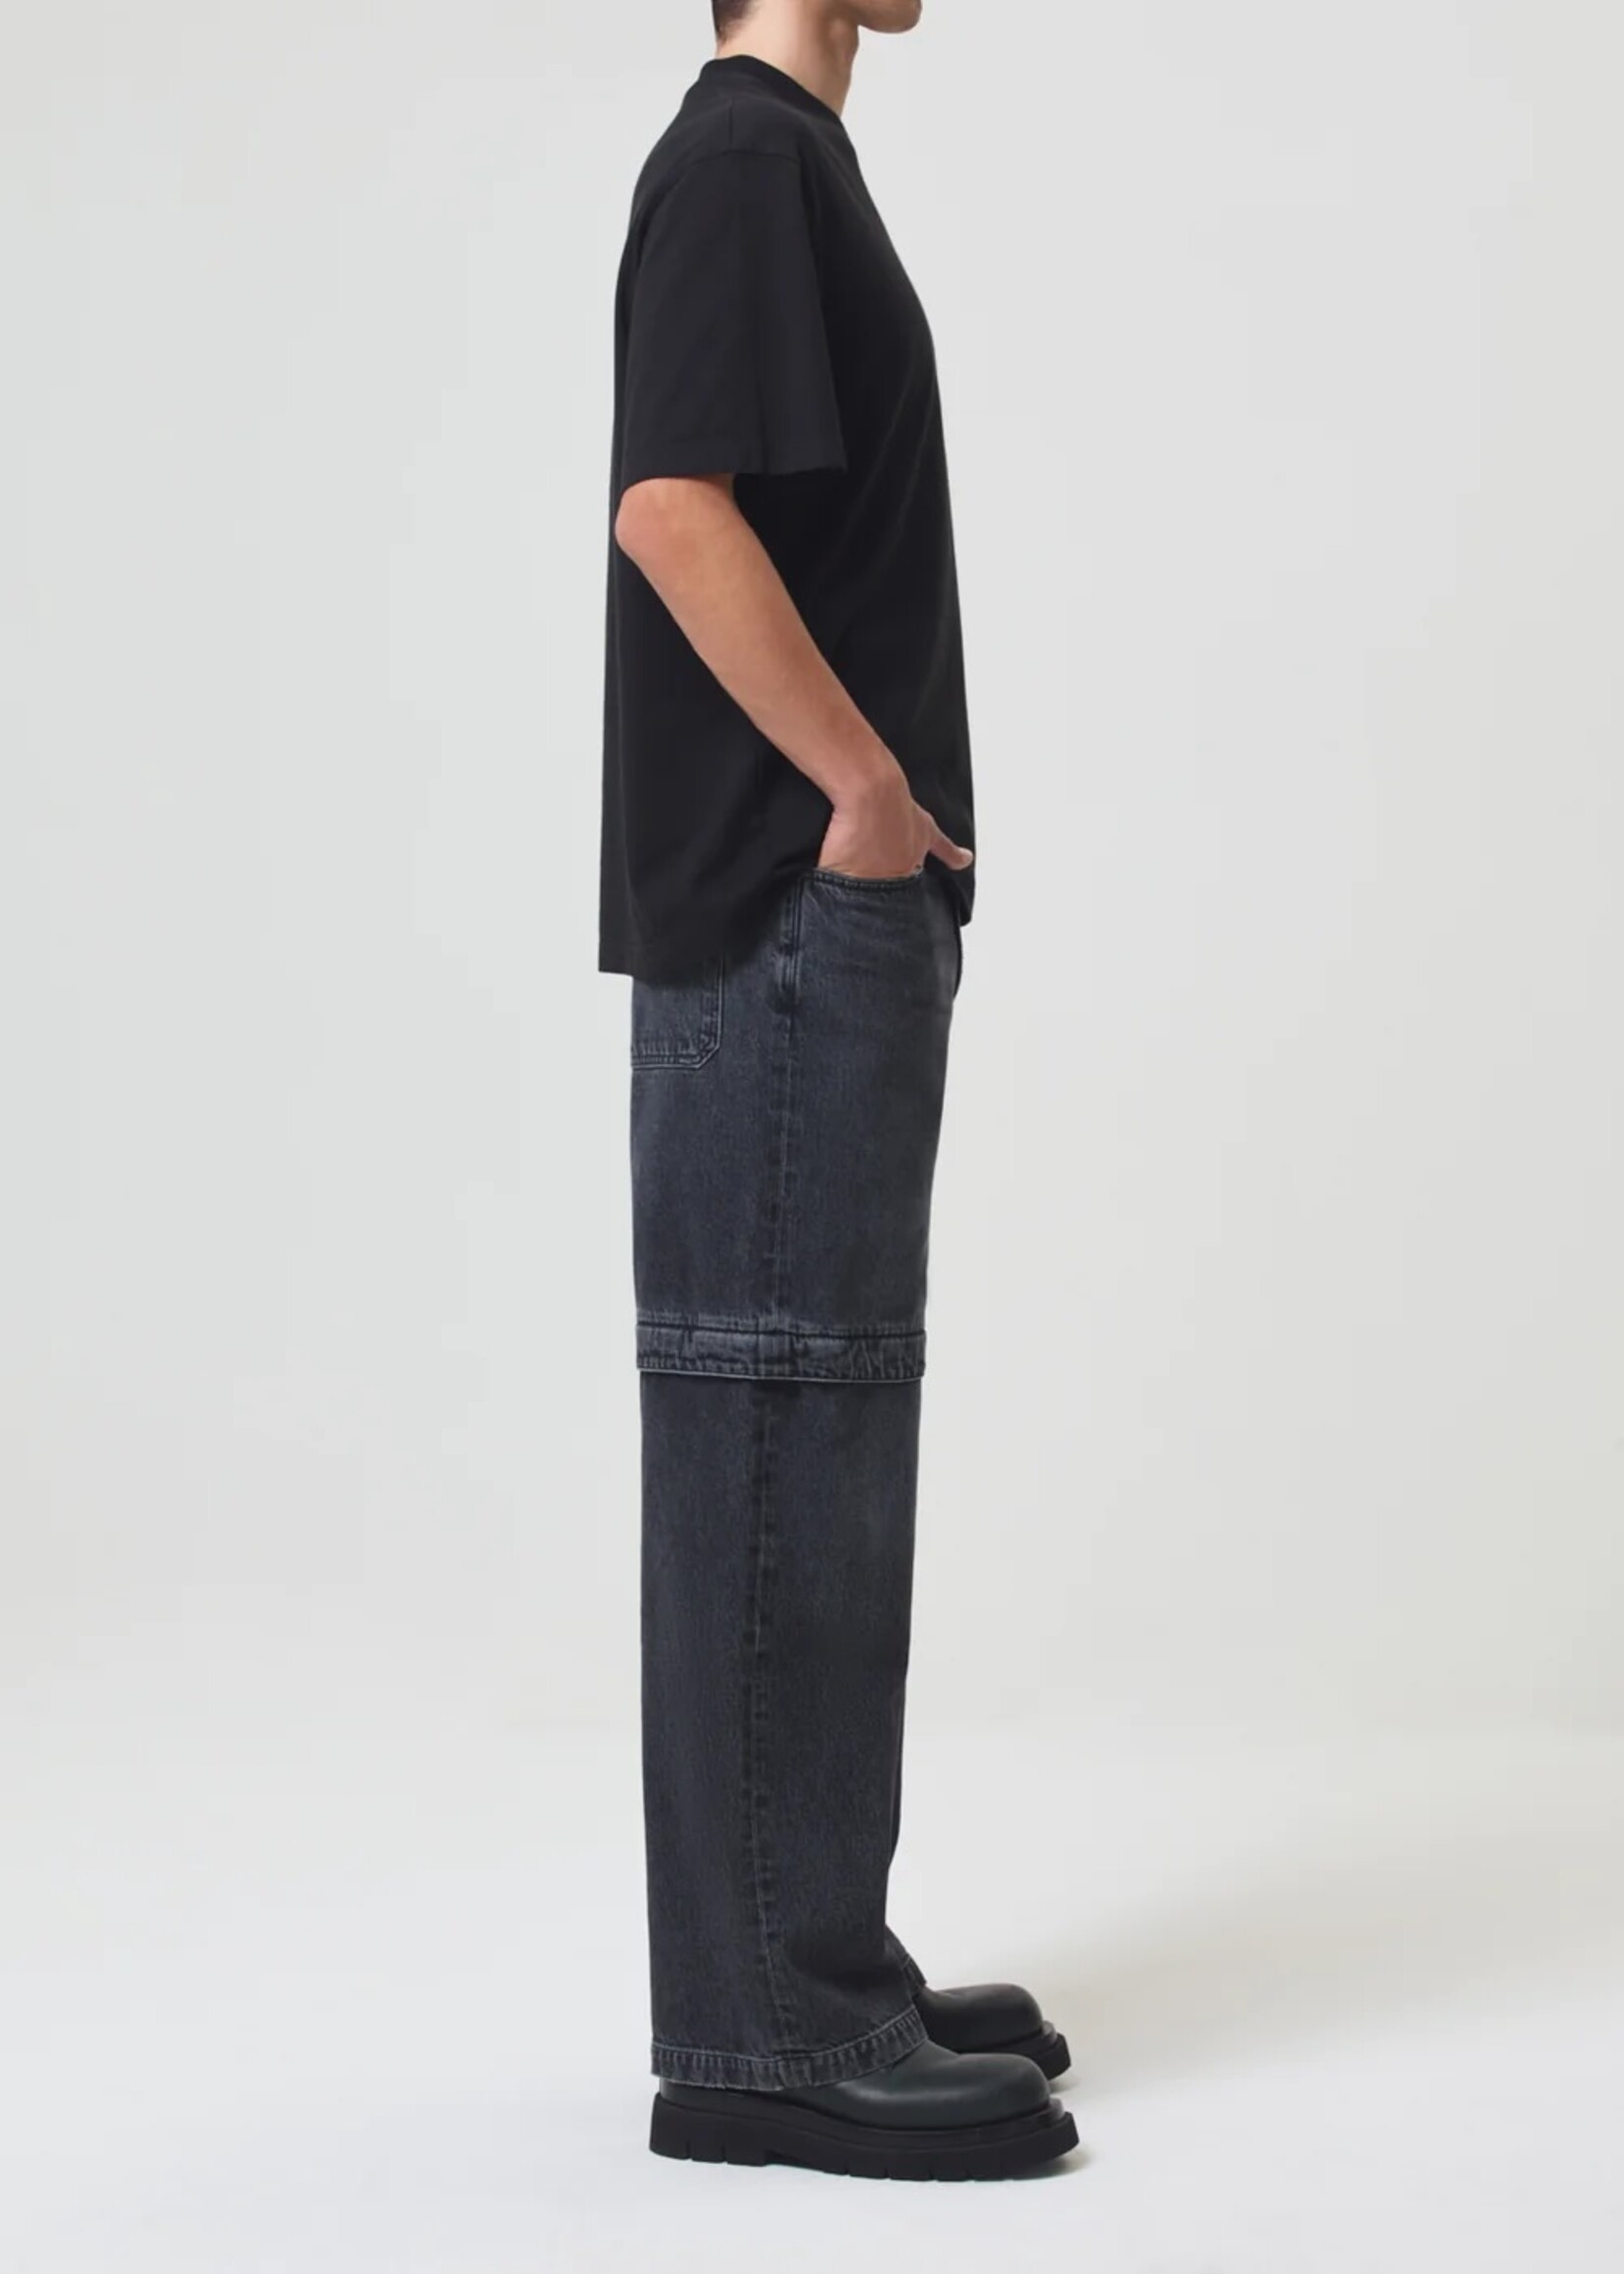 AGOLDE Rosco Utility Convertible Jeans in Washed Black